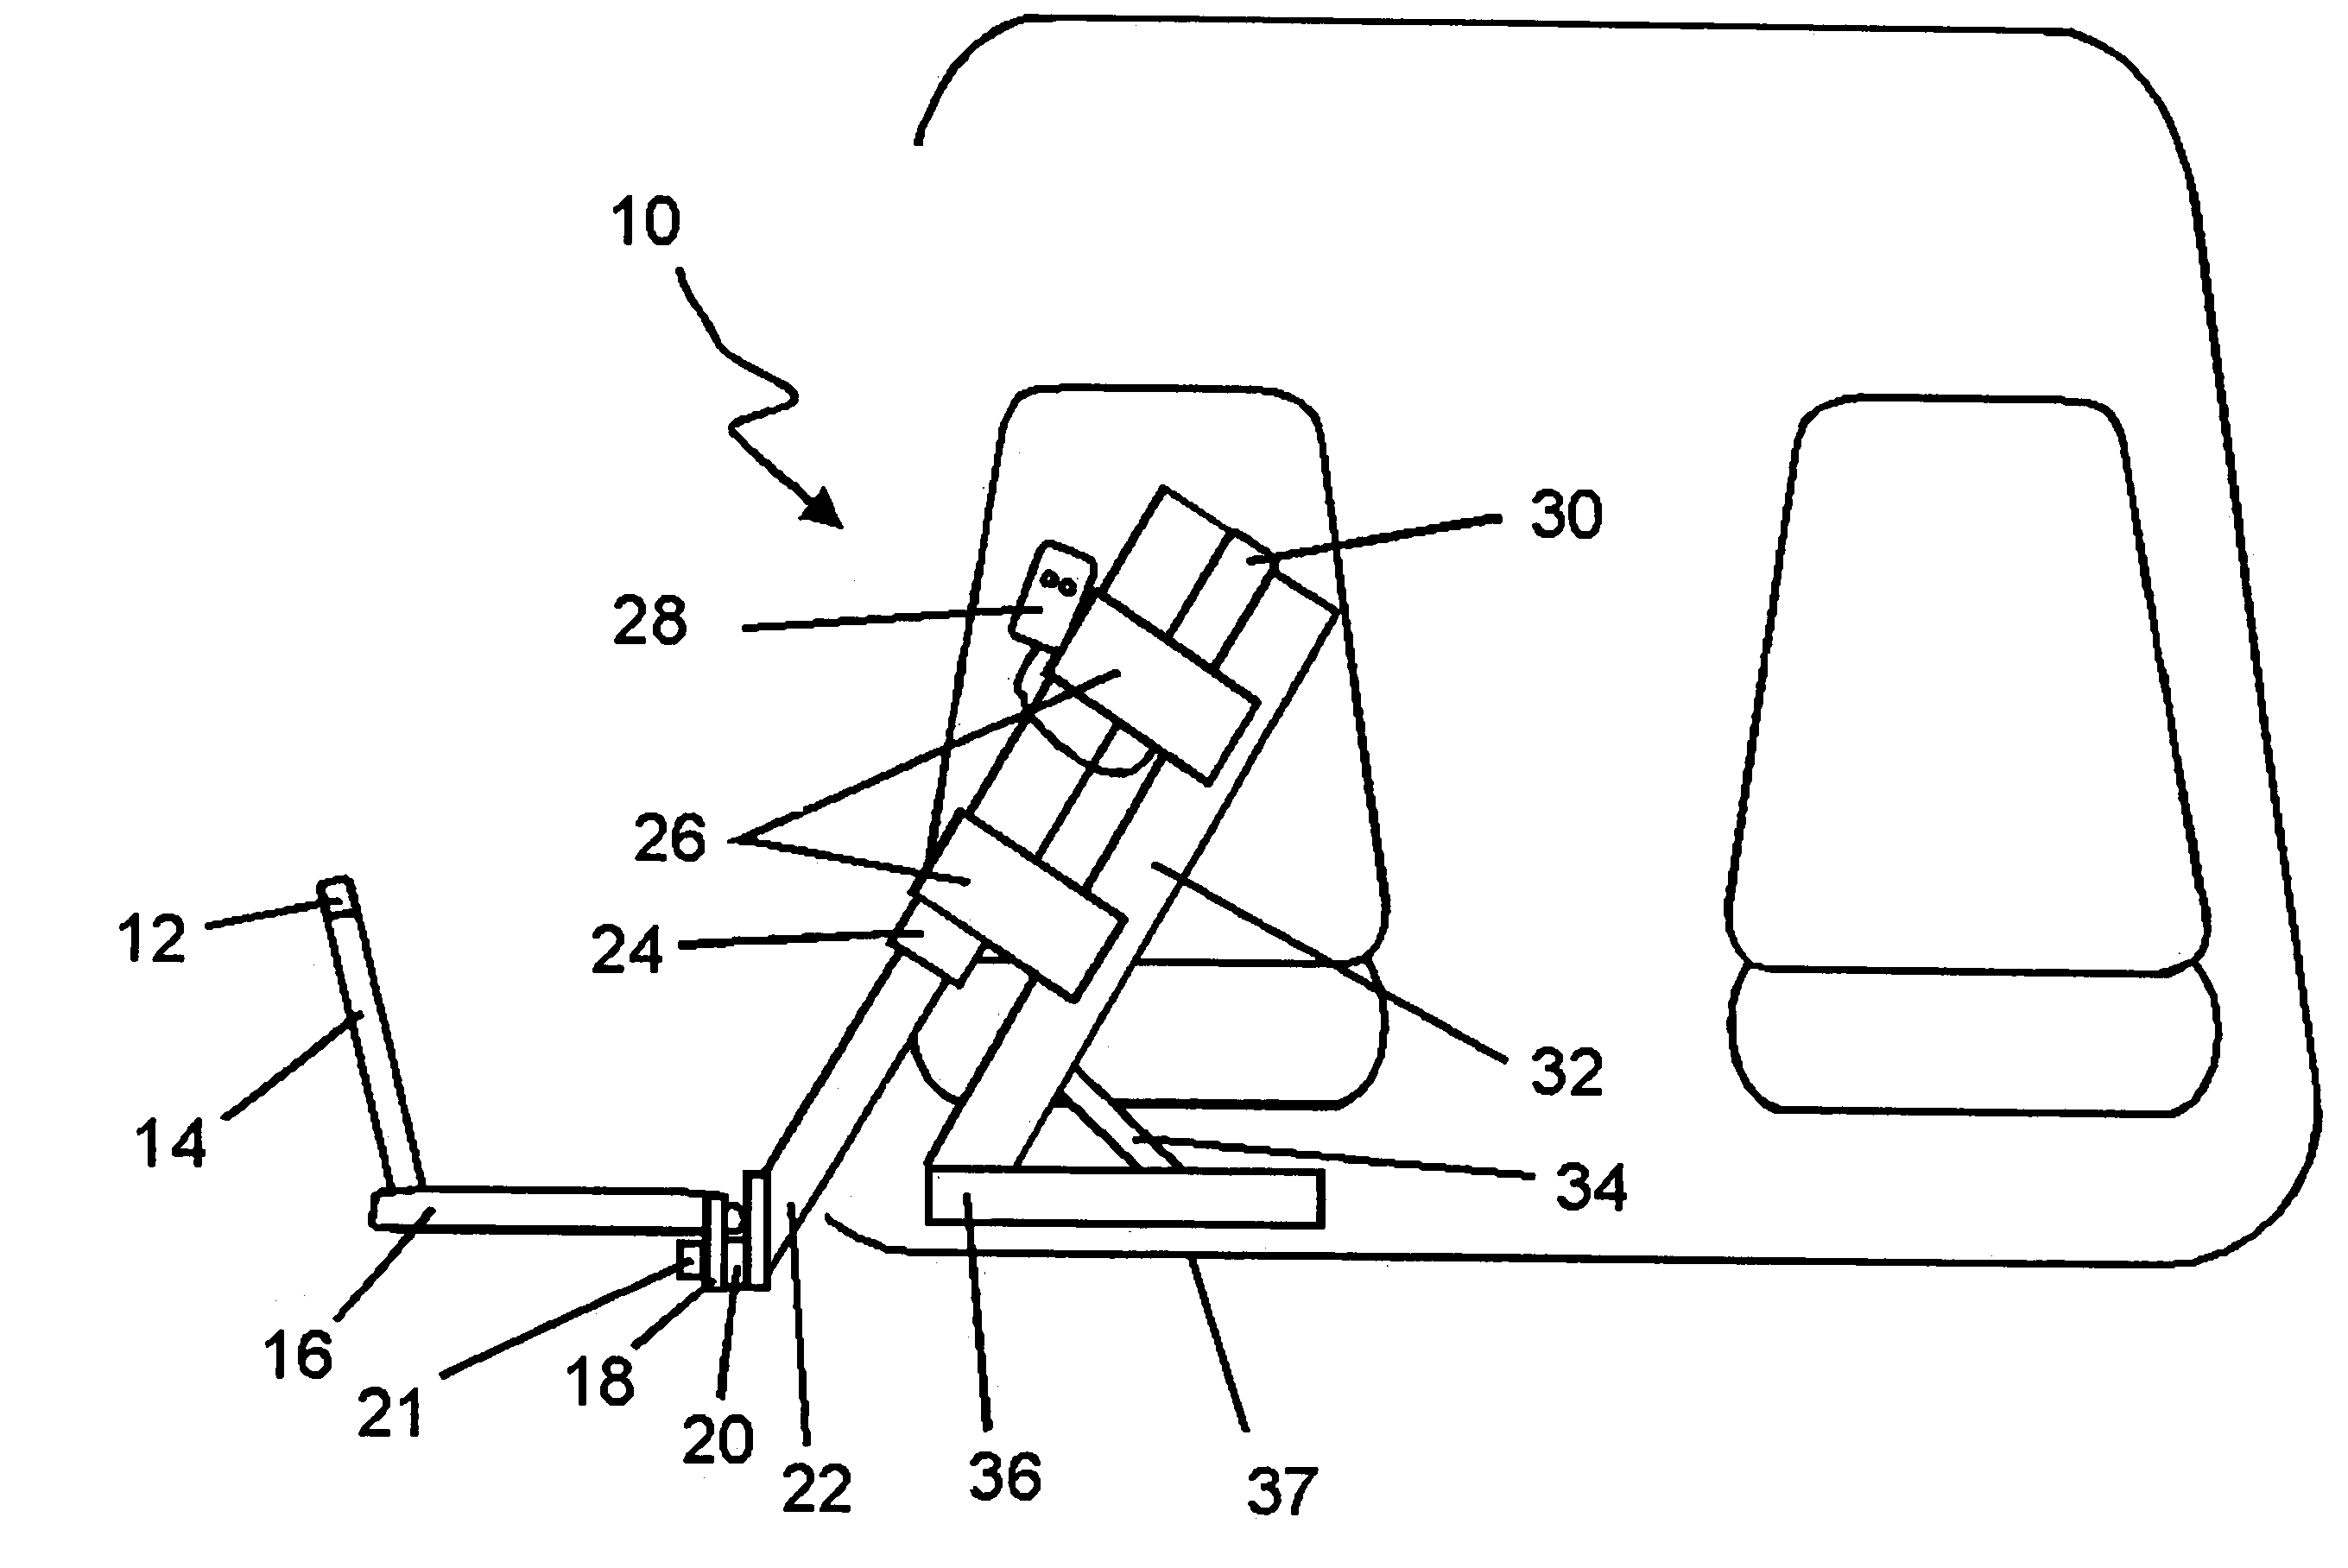 Electrically-actuated transfer seat